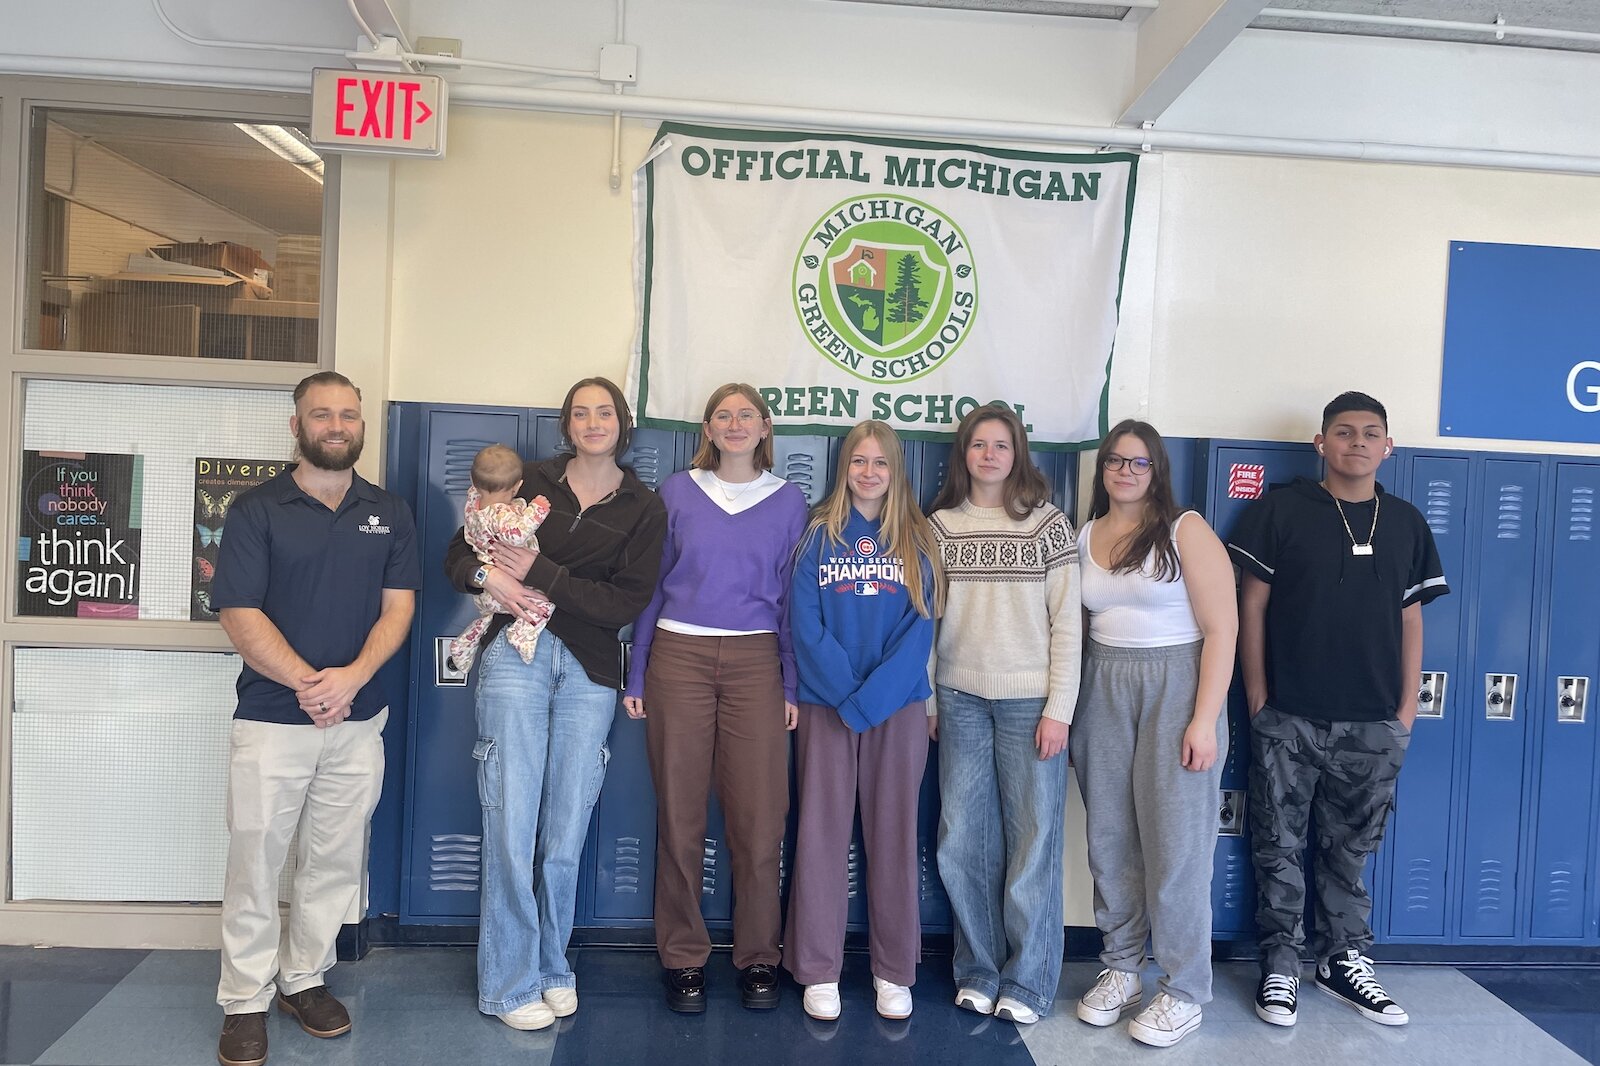 Green School Club at Loy Norrix is a collection of students that have unified under a common set of environmental goals. Student led and driven, this club aims to raise school awareness of environmental issues, make a direct impact in the community.